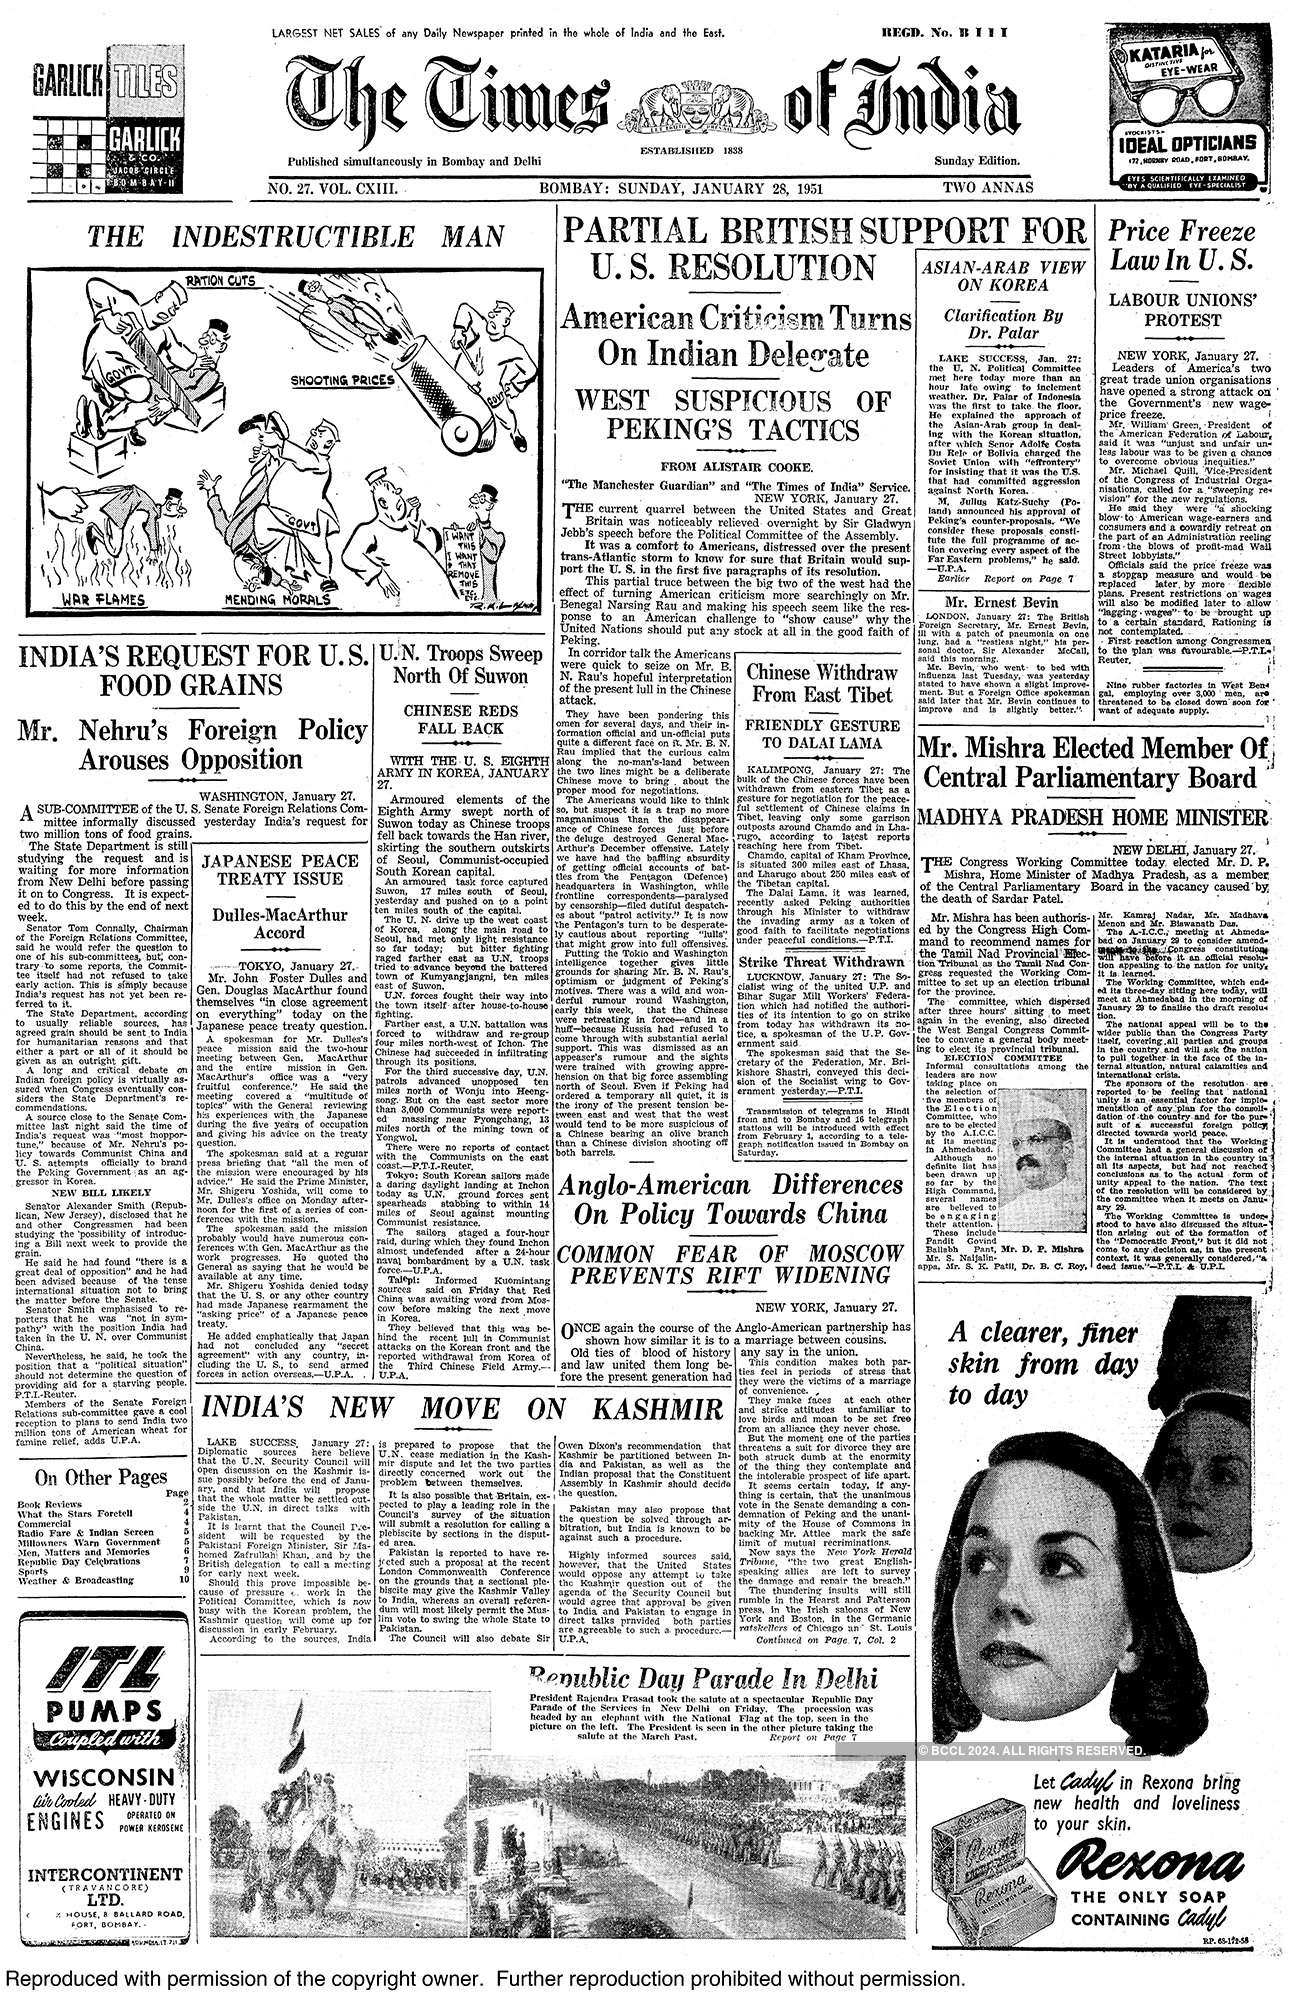 Republic Day through the years from The Times of India's archives